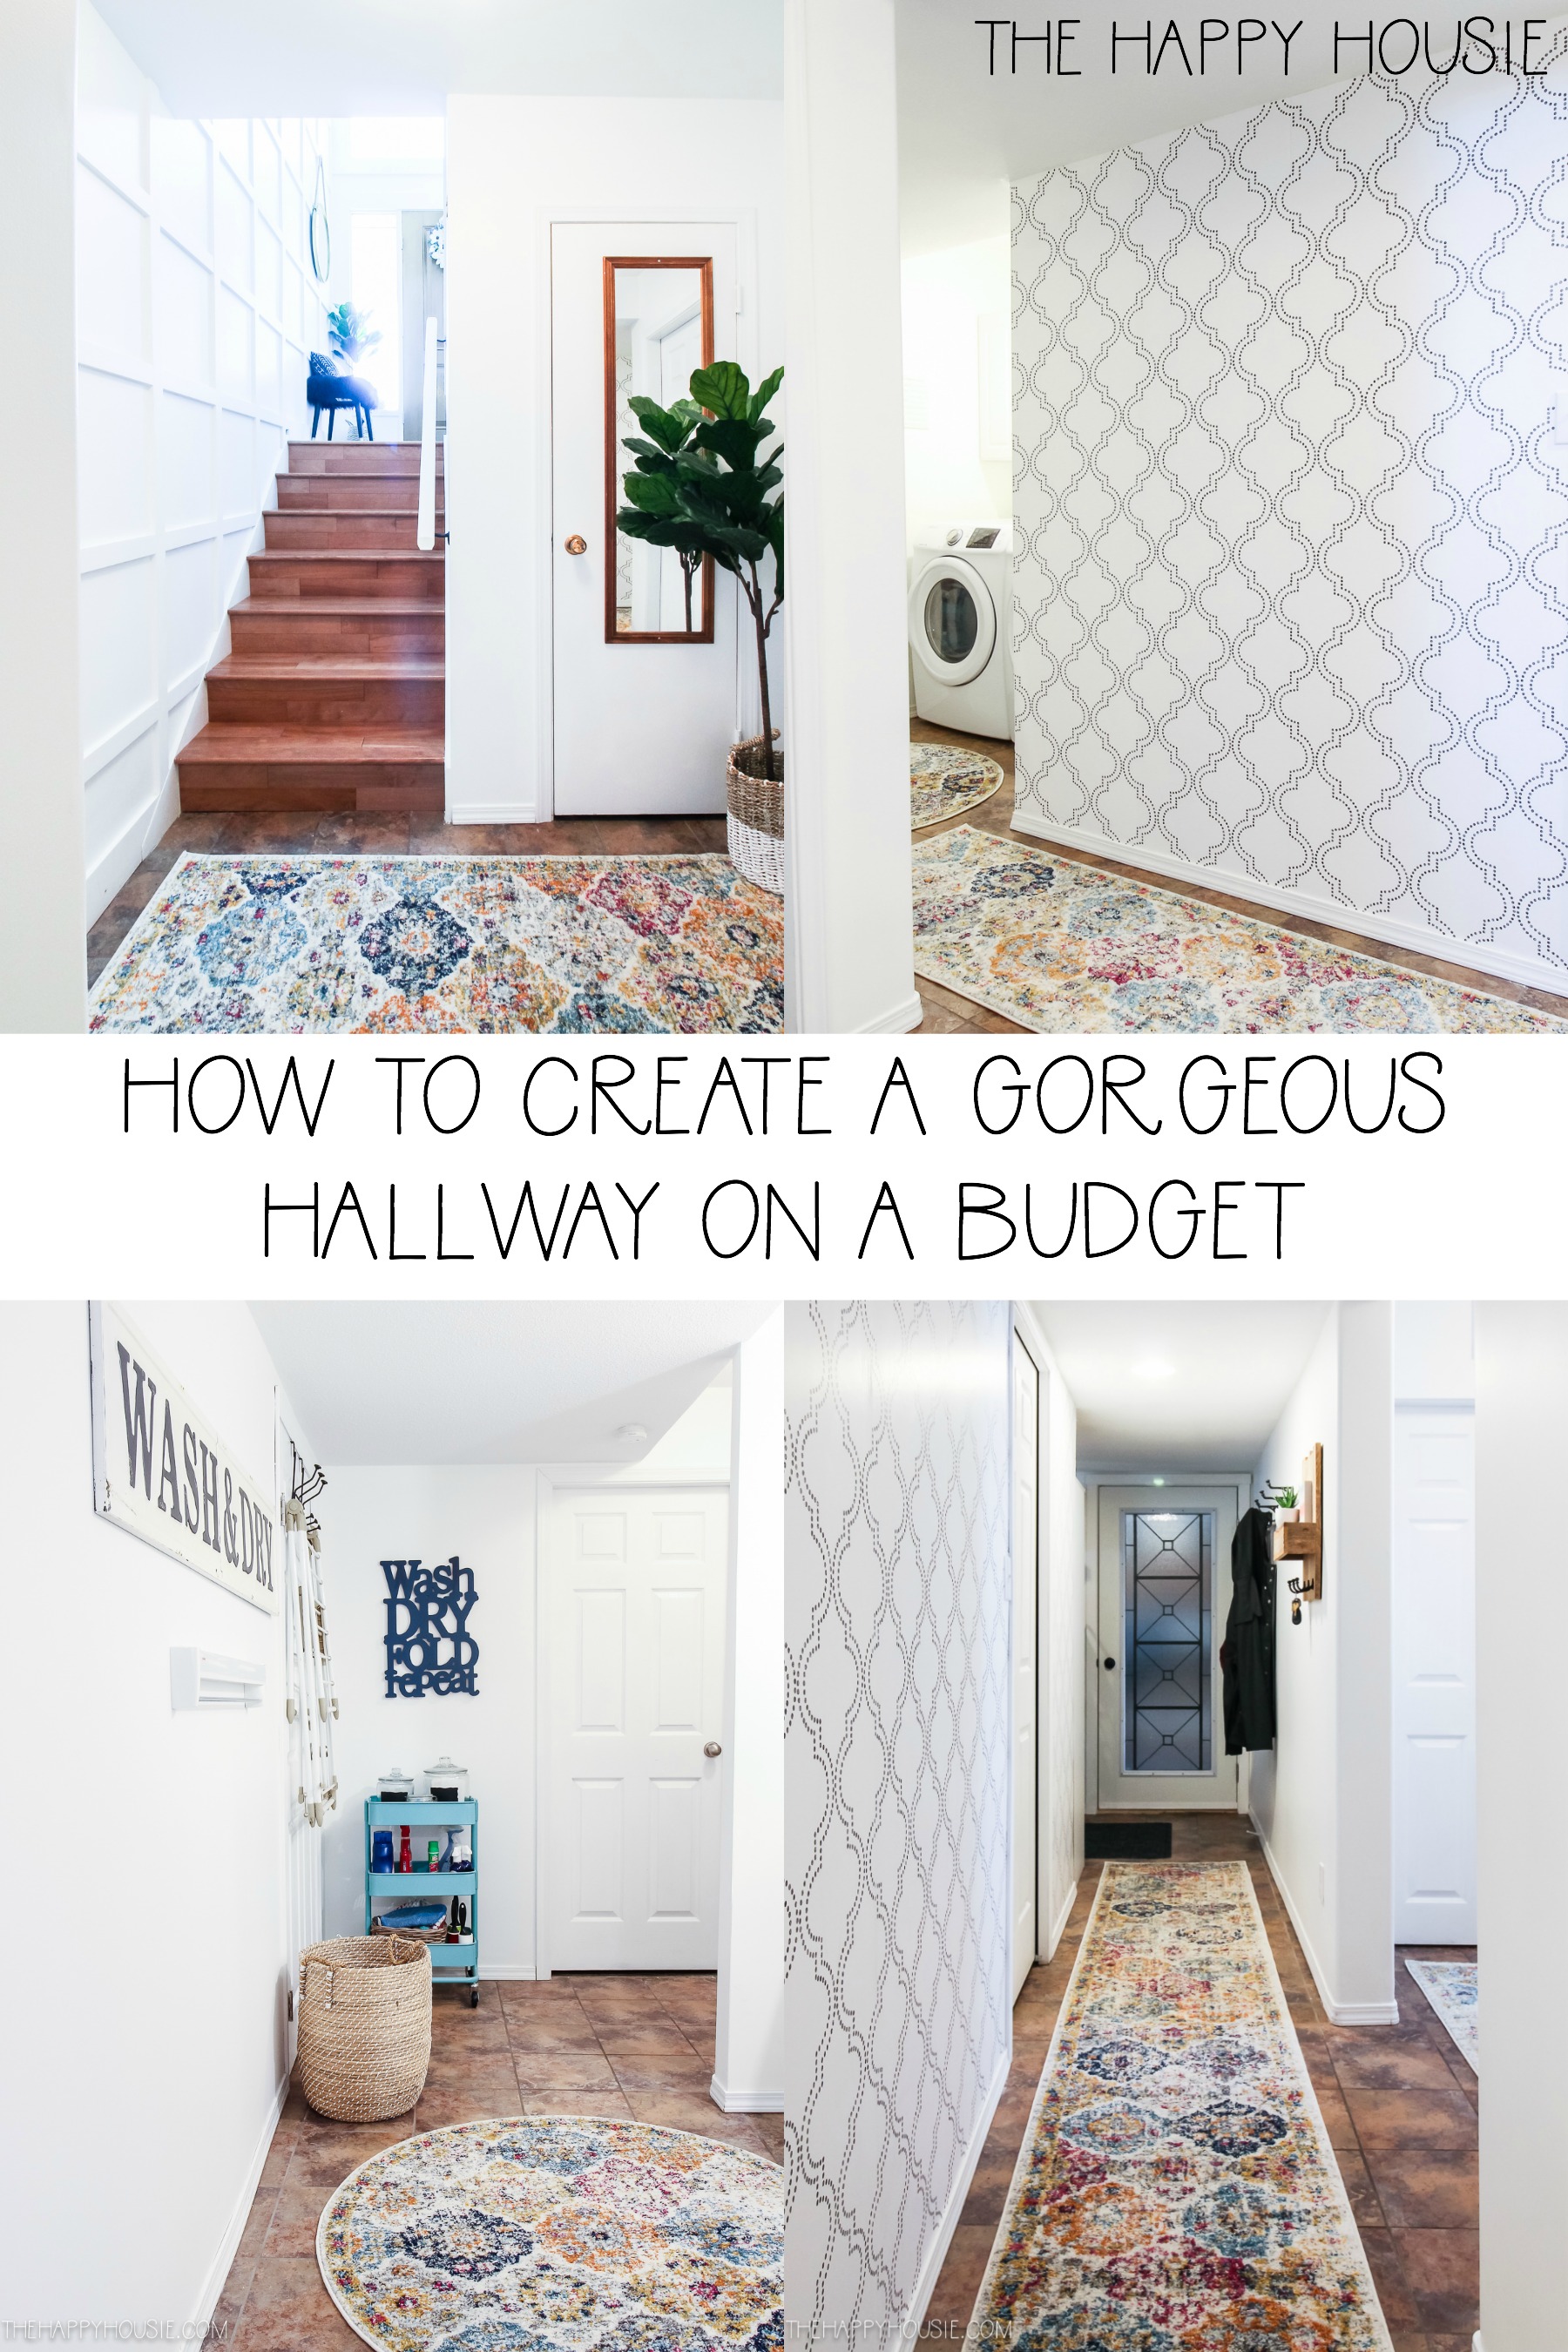 How To Create A Gorgeous Hallway On A Budget poster.